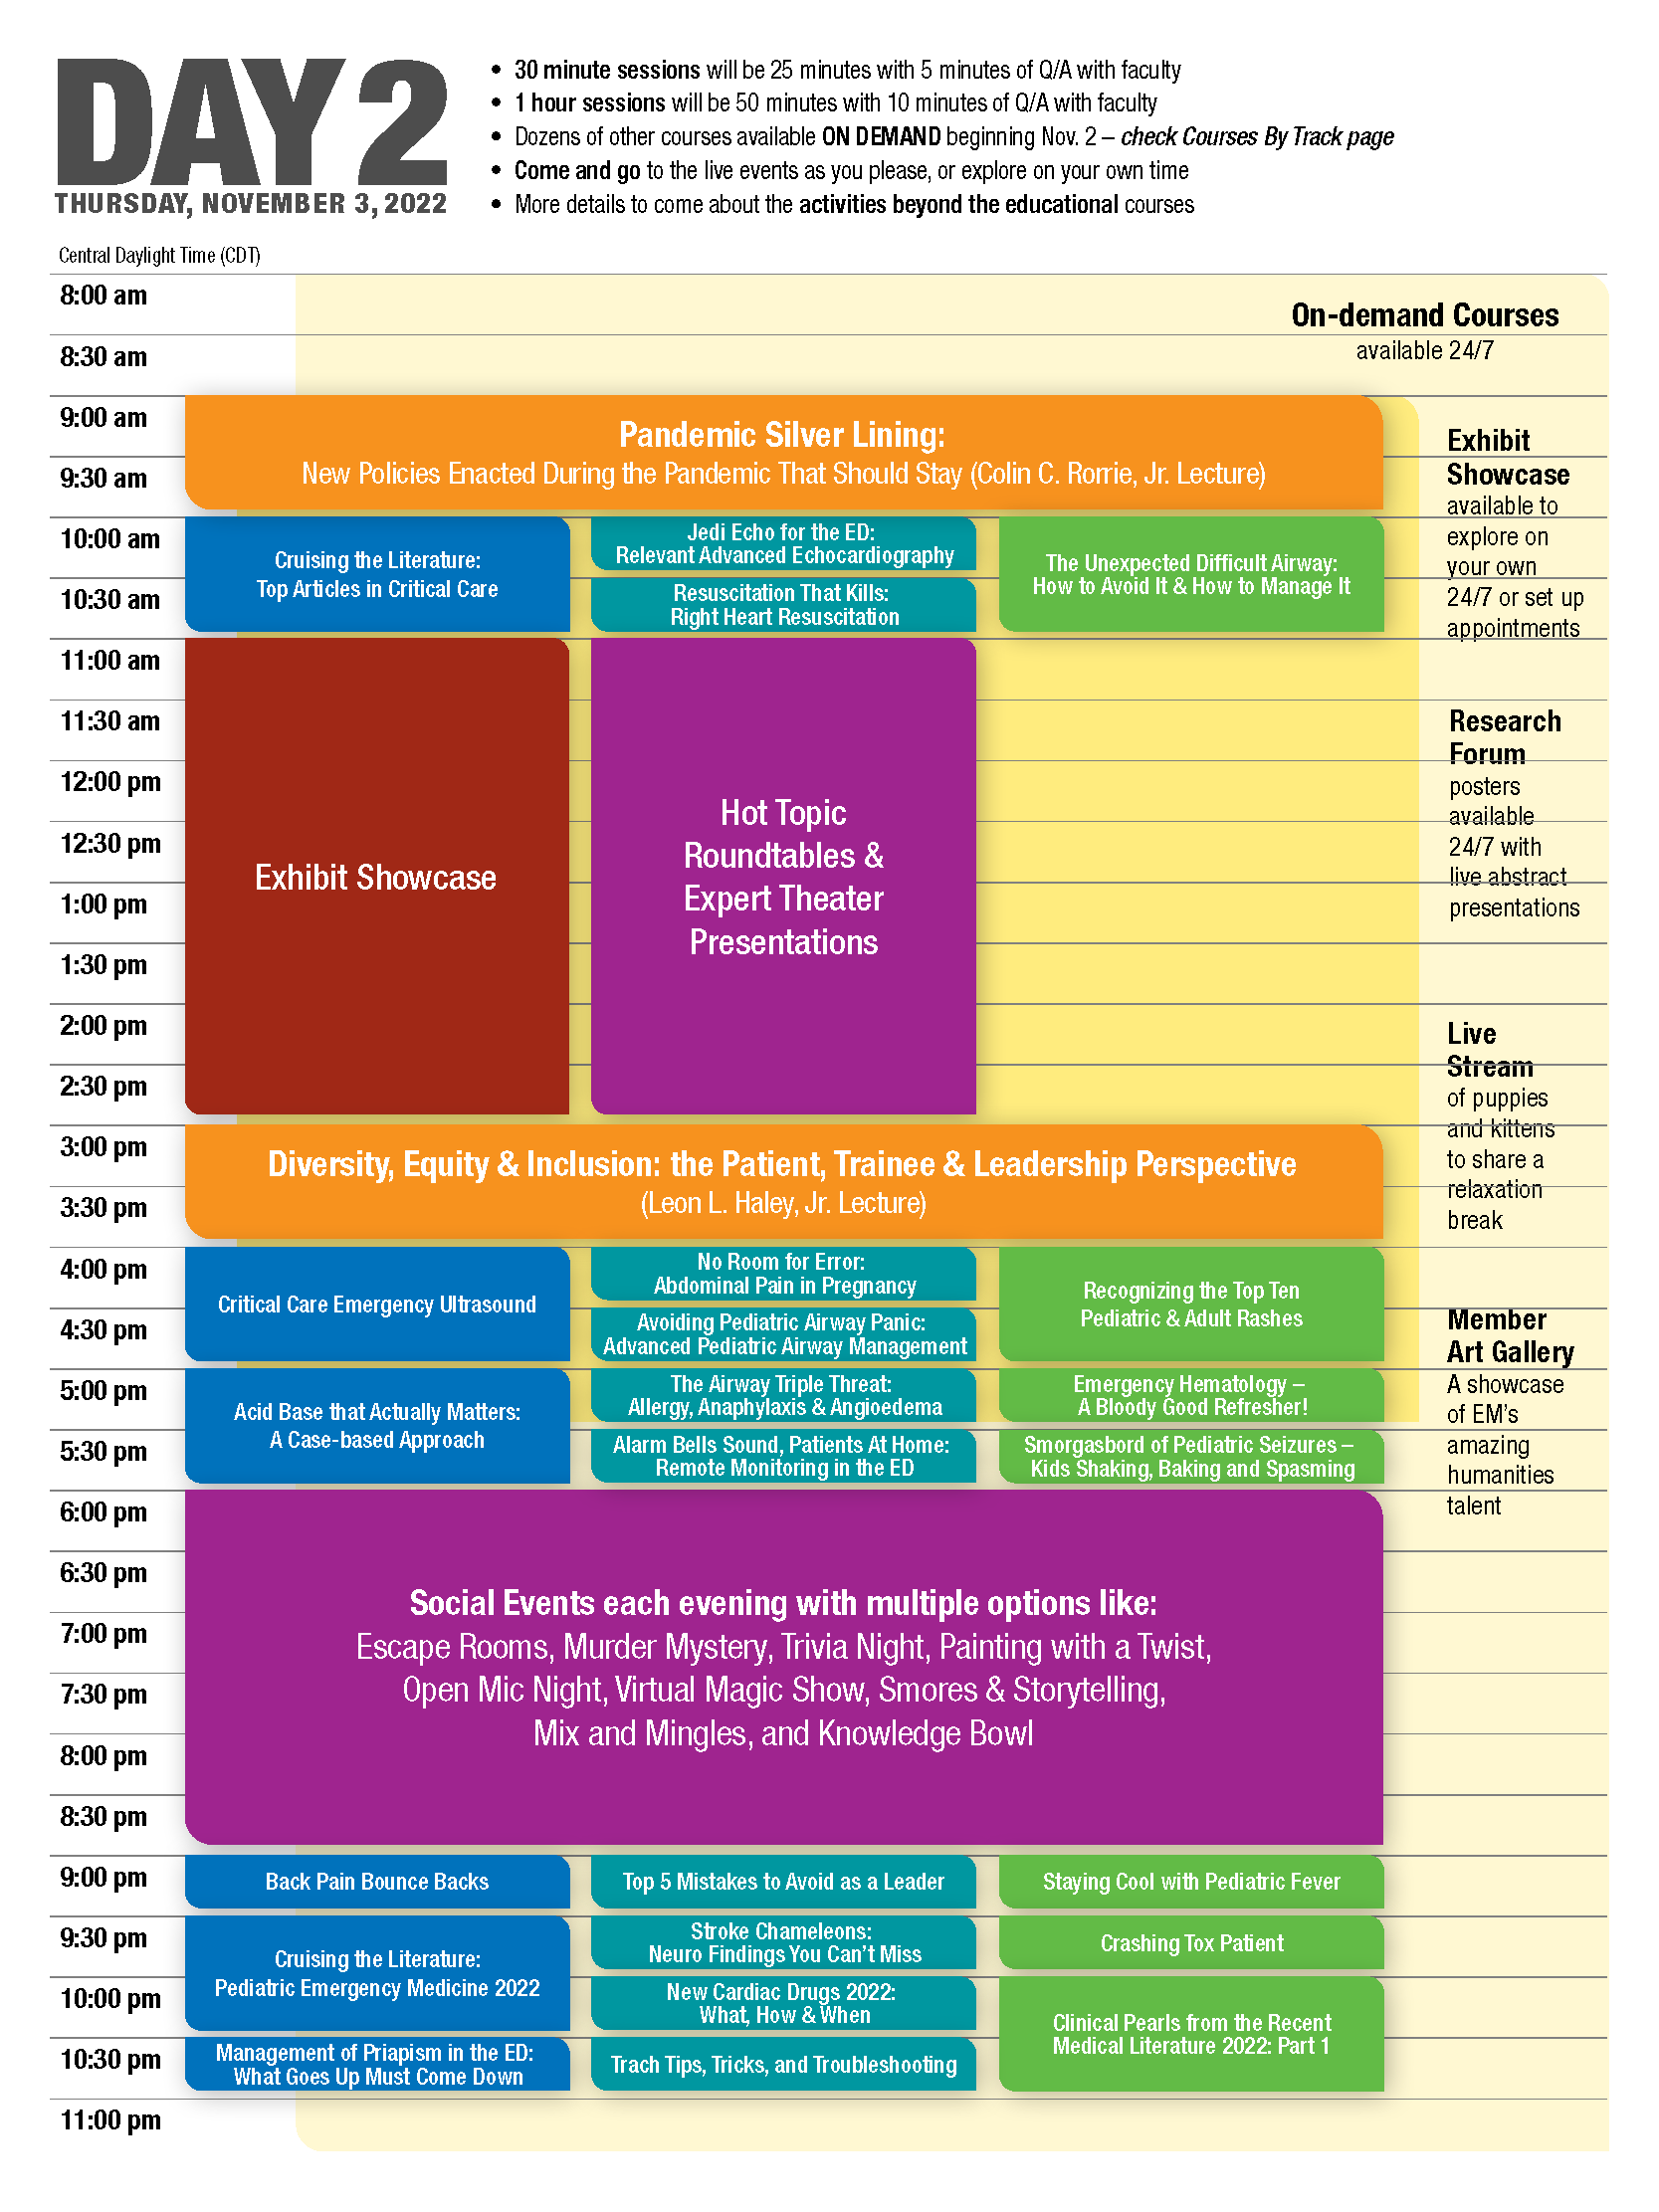 ACEP22-UnconventionalSchedules-Day2.png